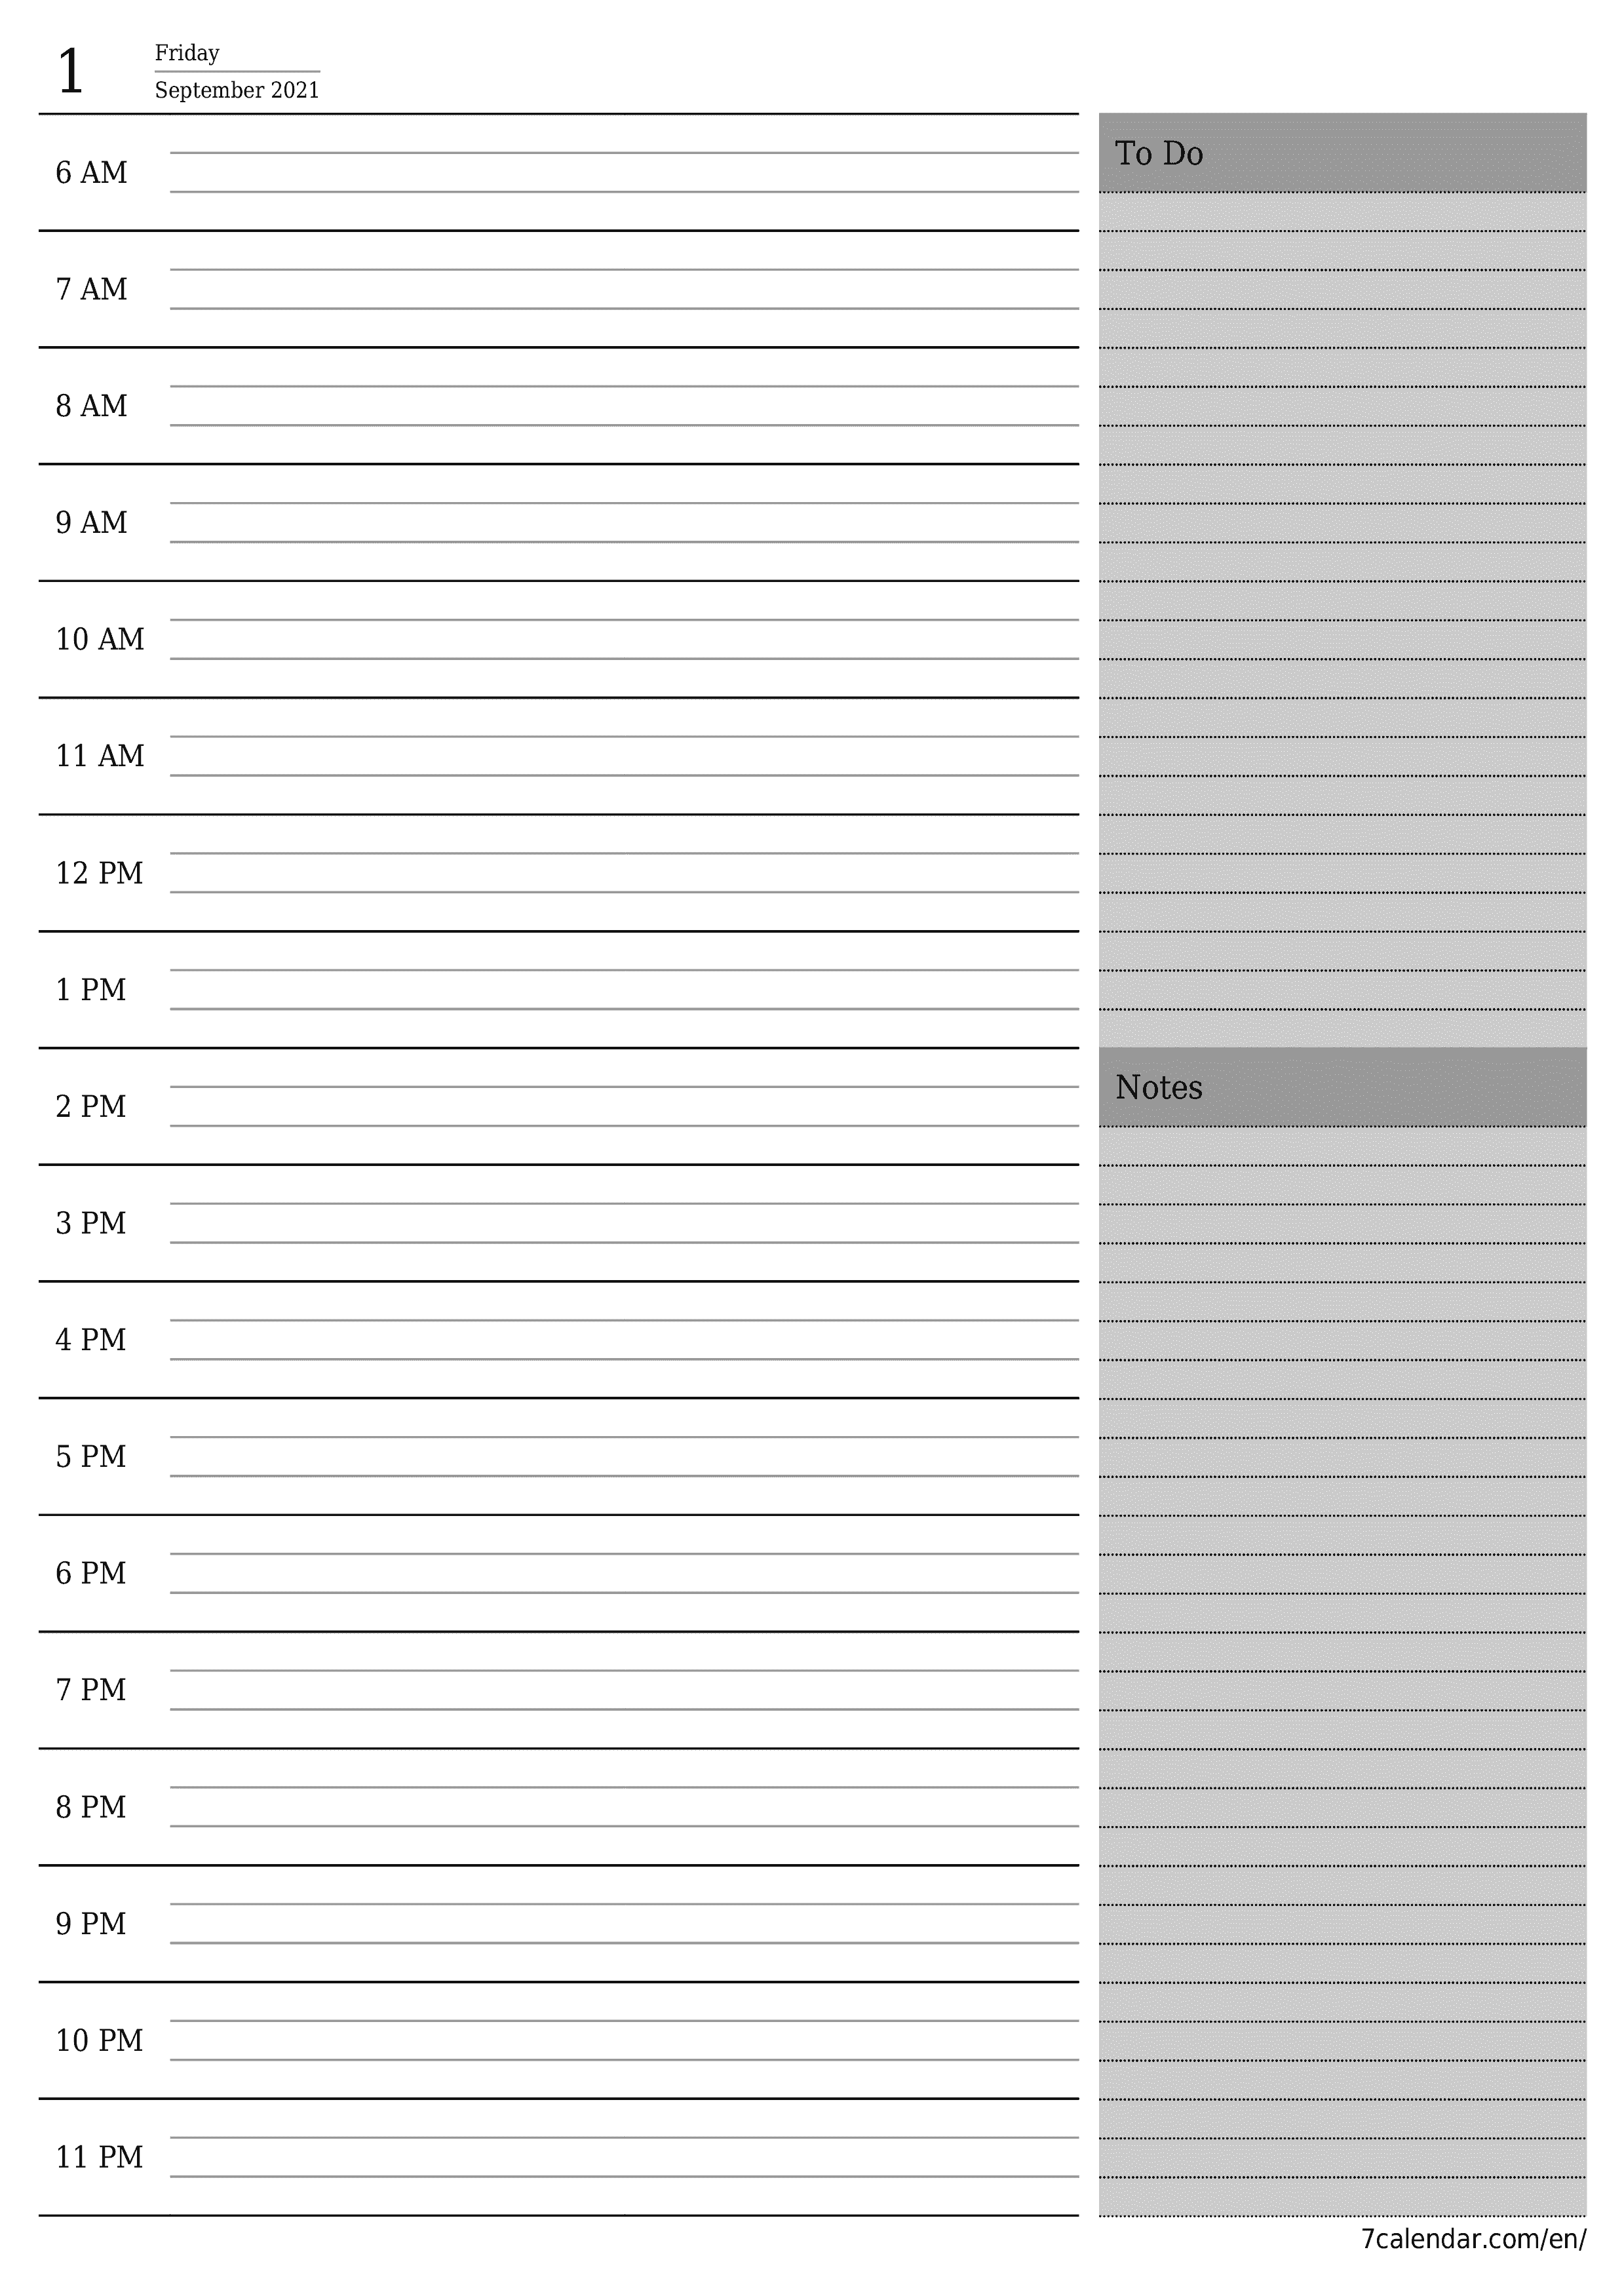 Blank daily printable calendar and planner for day September 2021 with notes, save and print to PDF PNG English - 7calendar.com